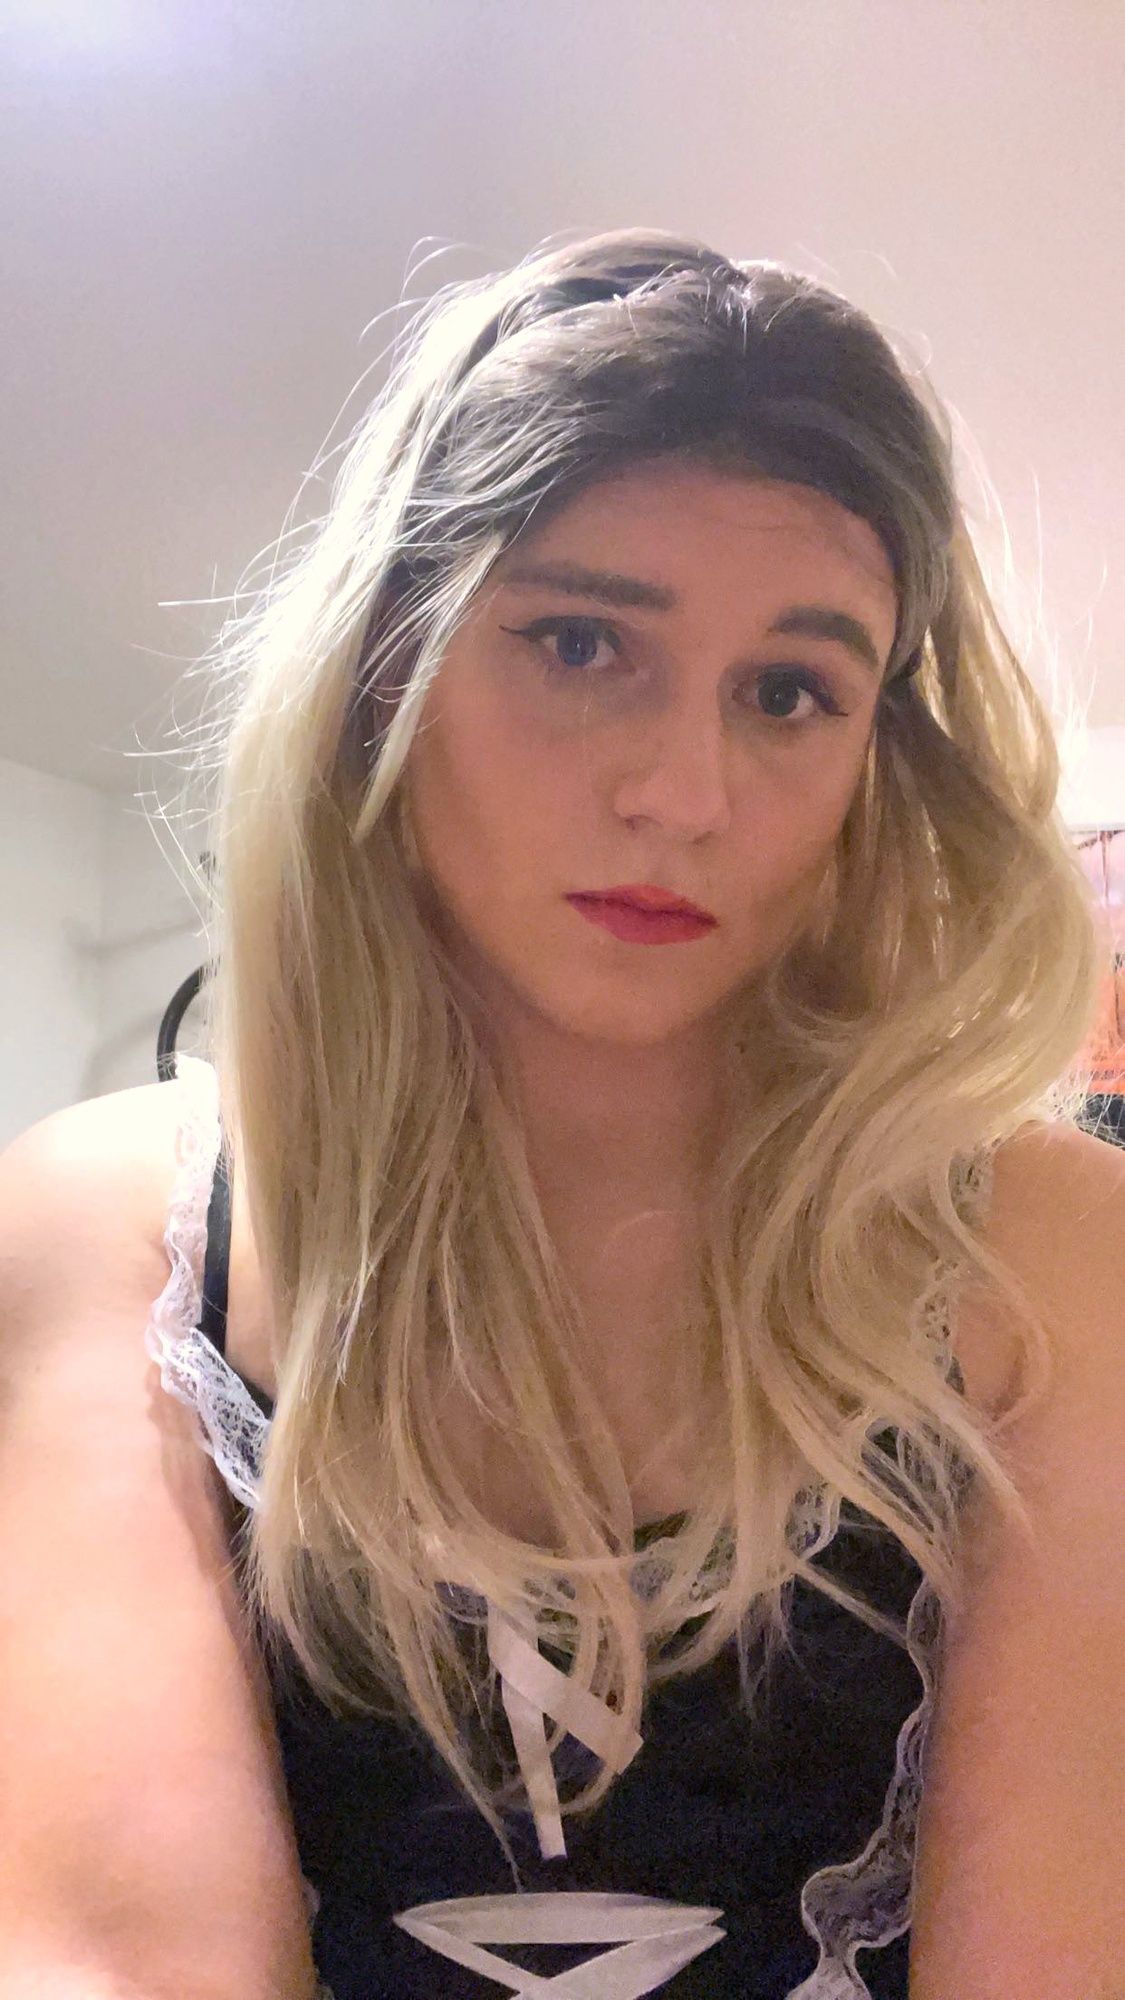 Sissy vallicxte: Love this wig  #2